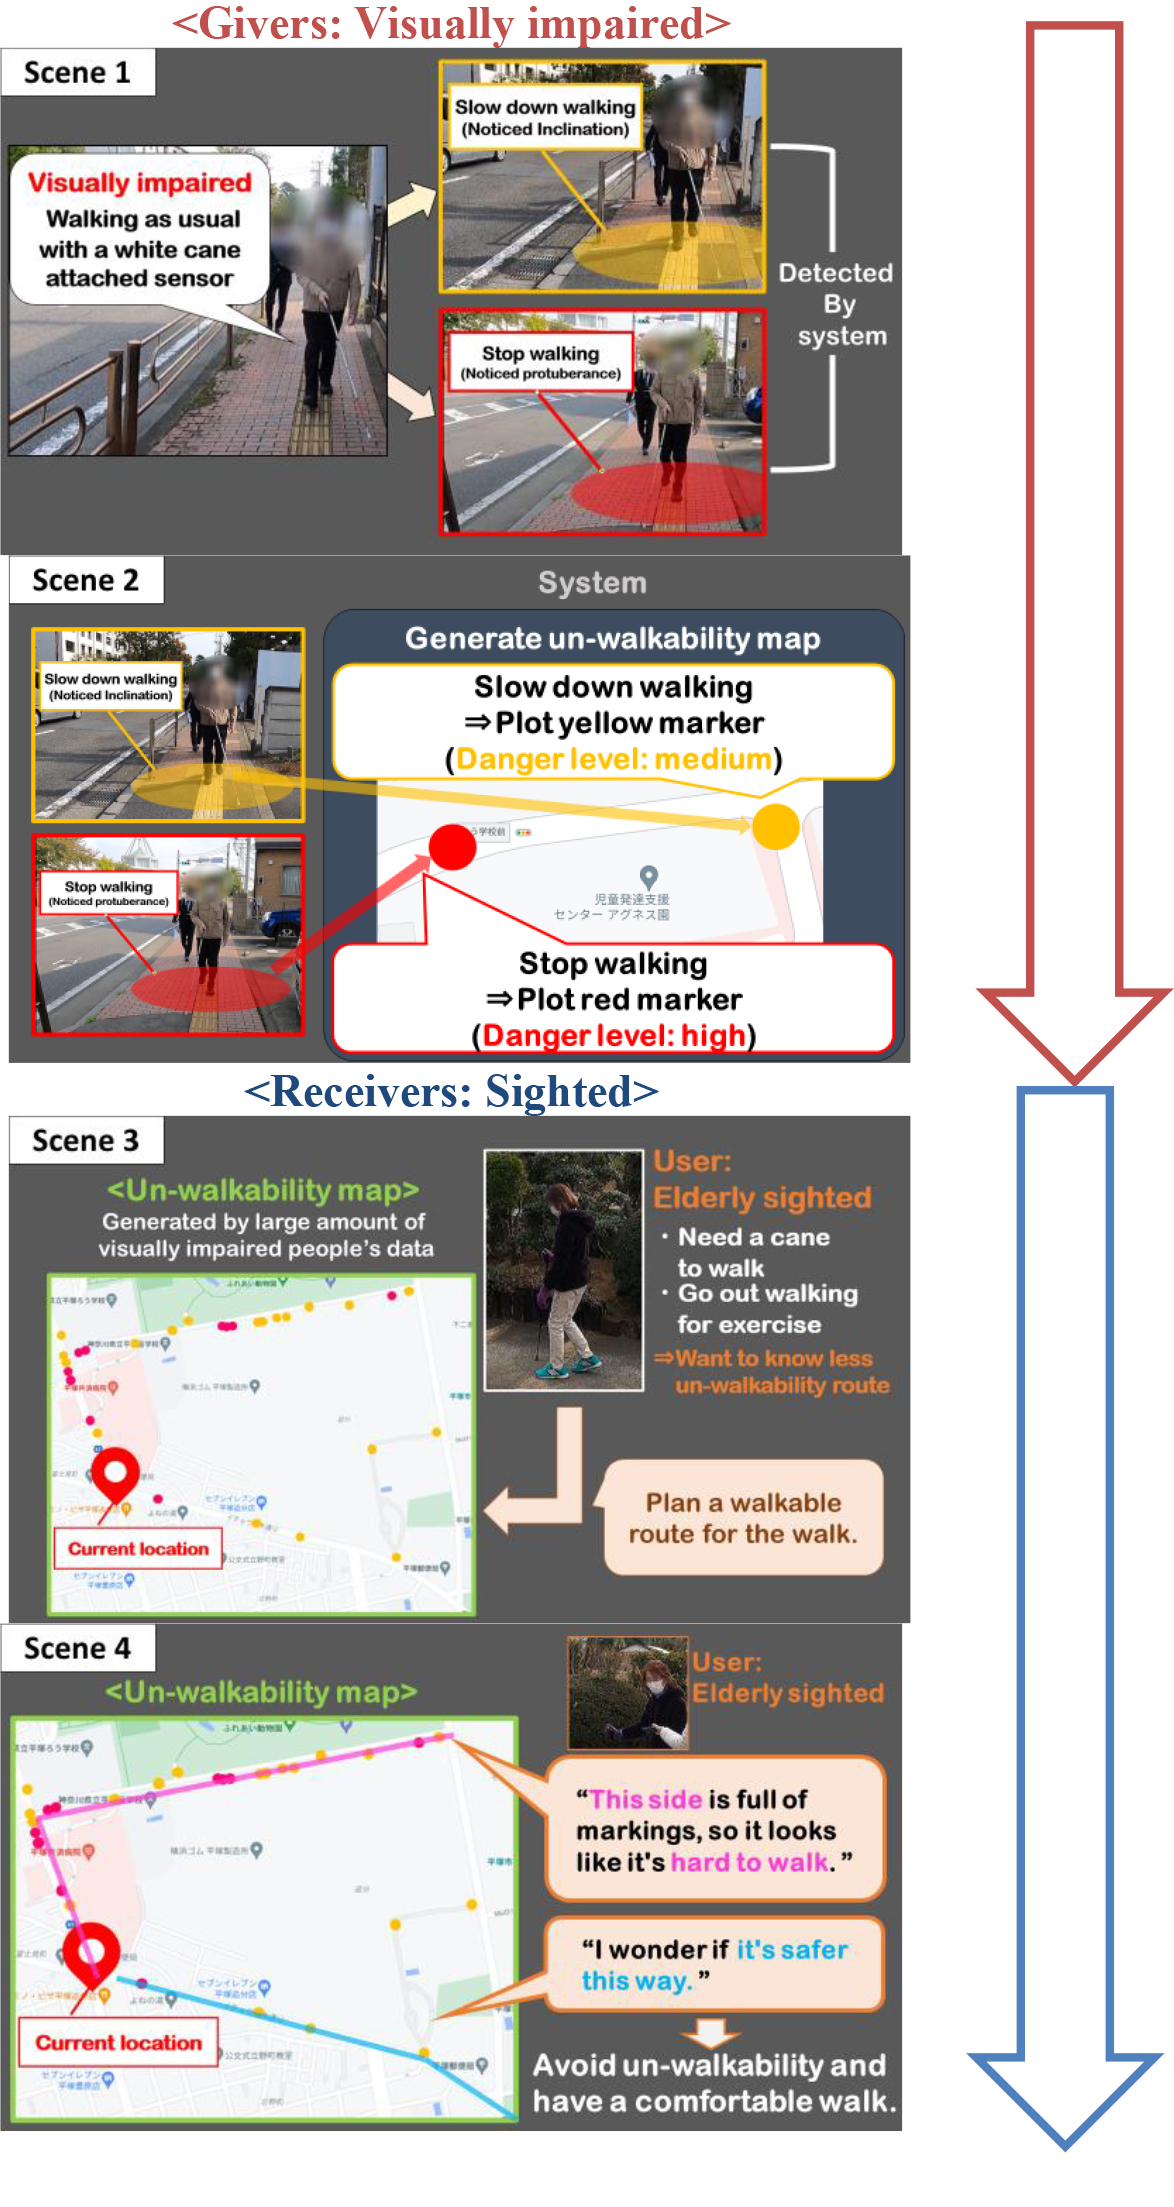 Example of a usage scenario. It shows how the inaccessible areas identified by visually impaired people are visualized on a map, which is then used by older sighted people to plan a more accessible walking route.